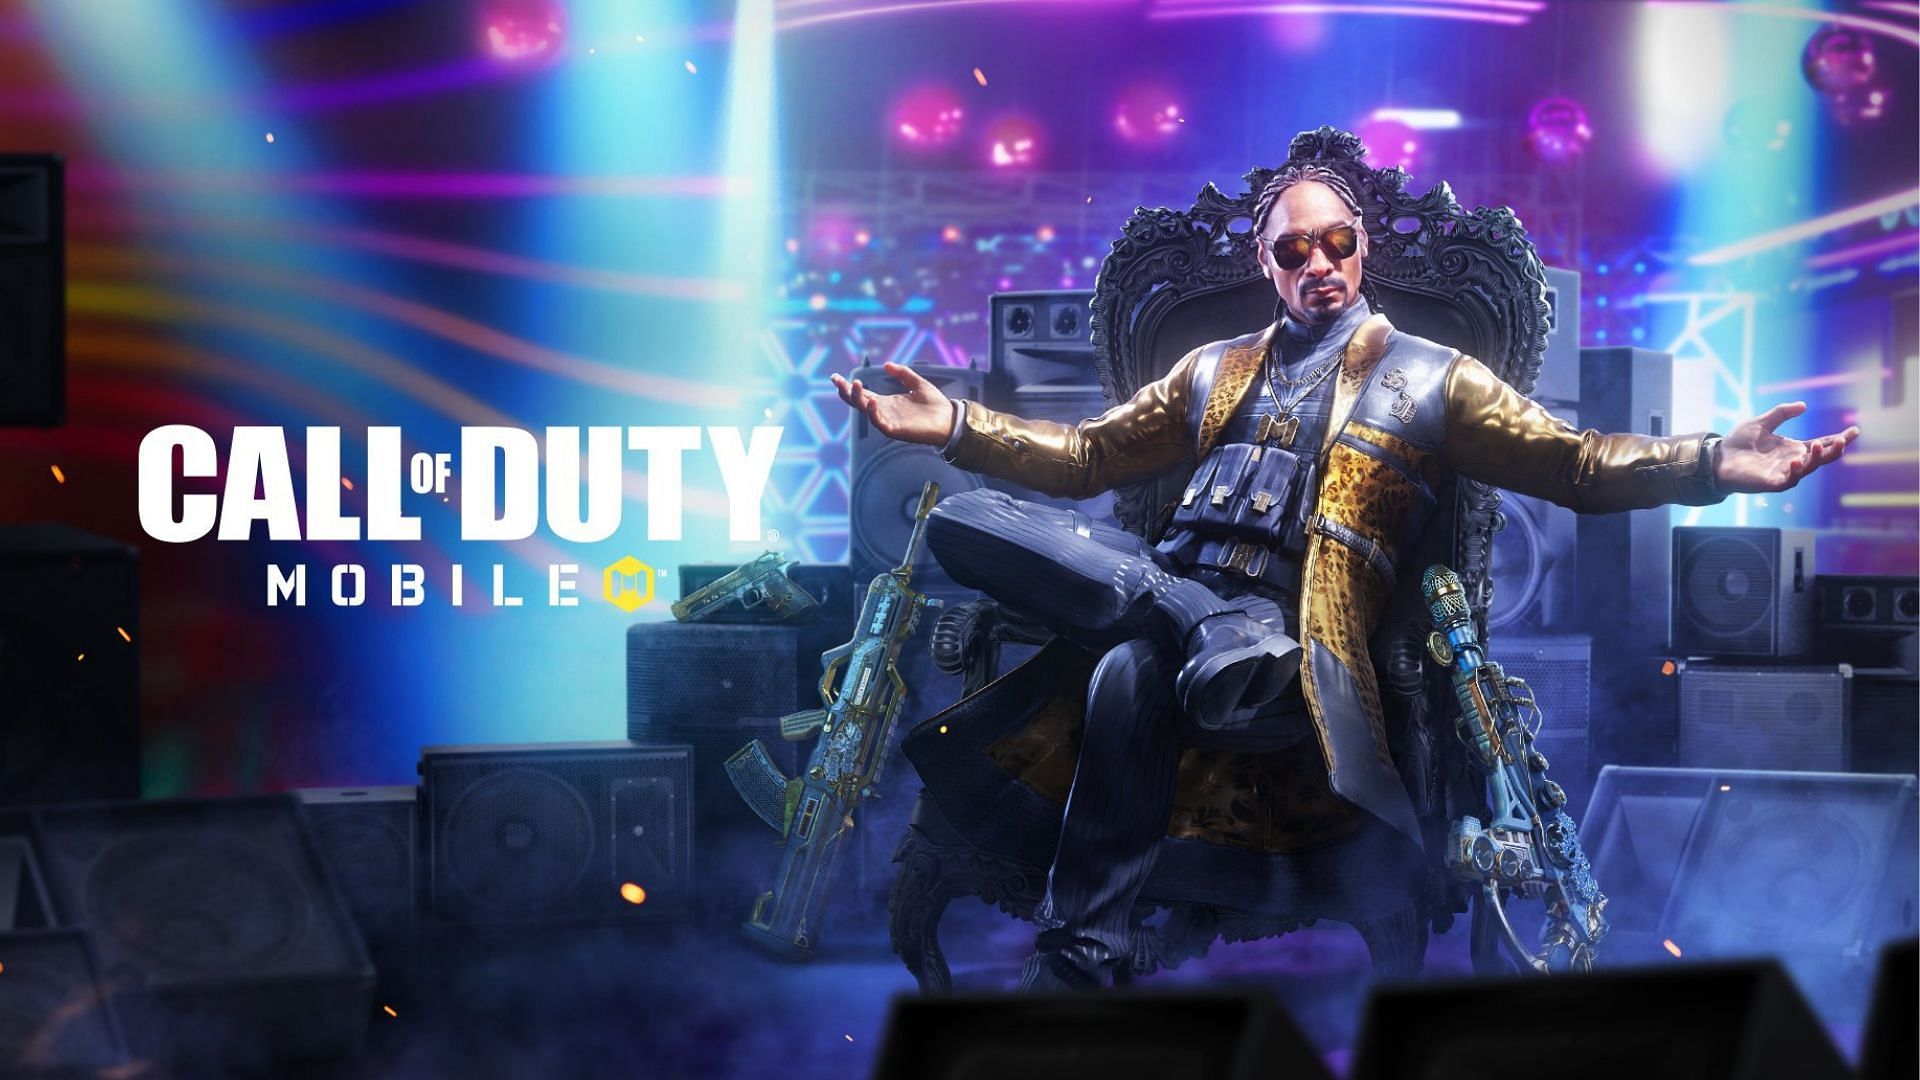 COD Mobile has launched a new RUS-74u Legendary blueprint along with the much-awaited Snoop Dogg operator skin in Season 3 (Image via Activision)